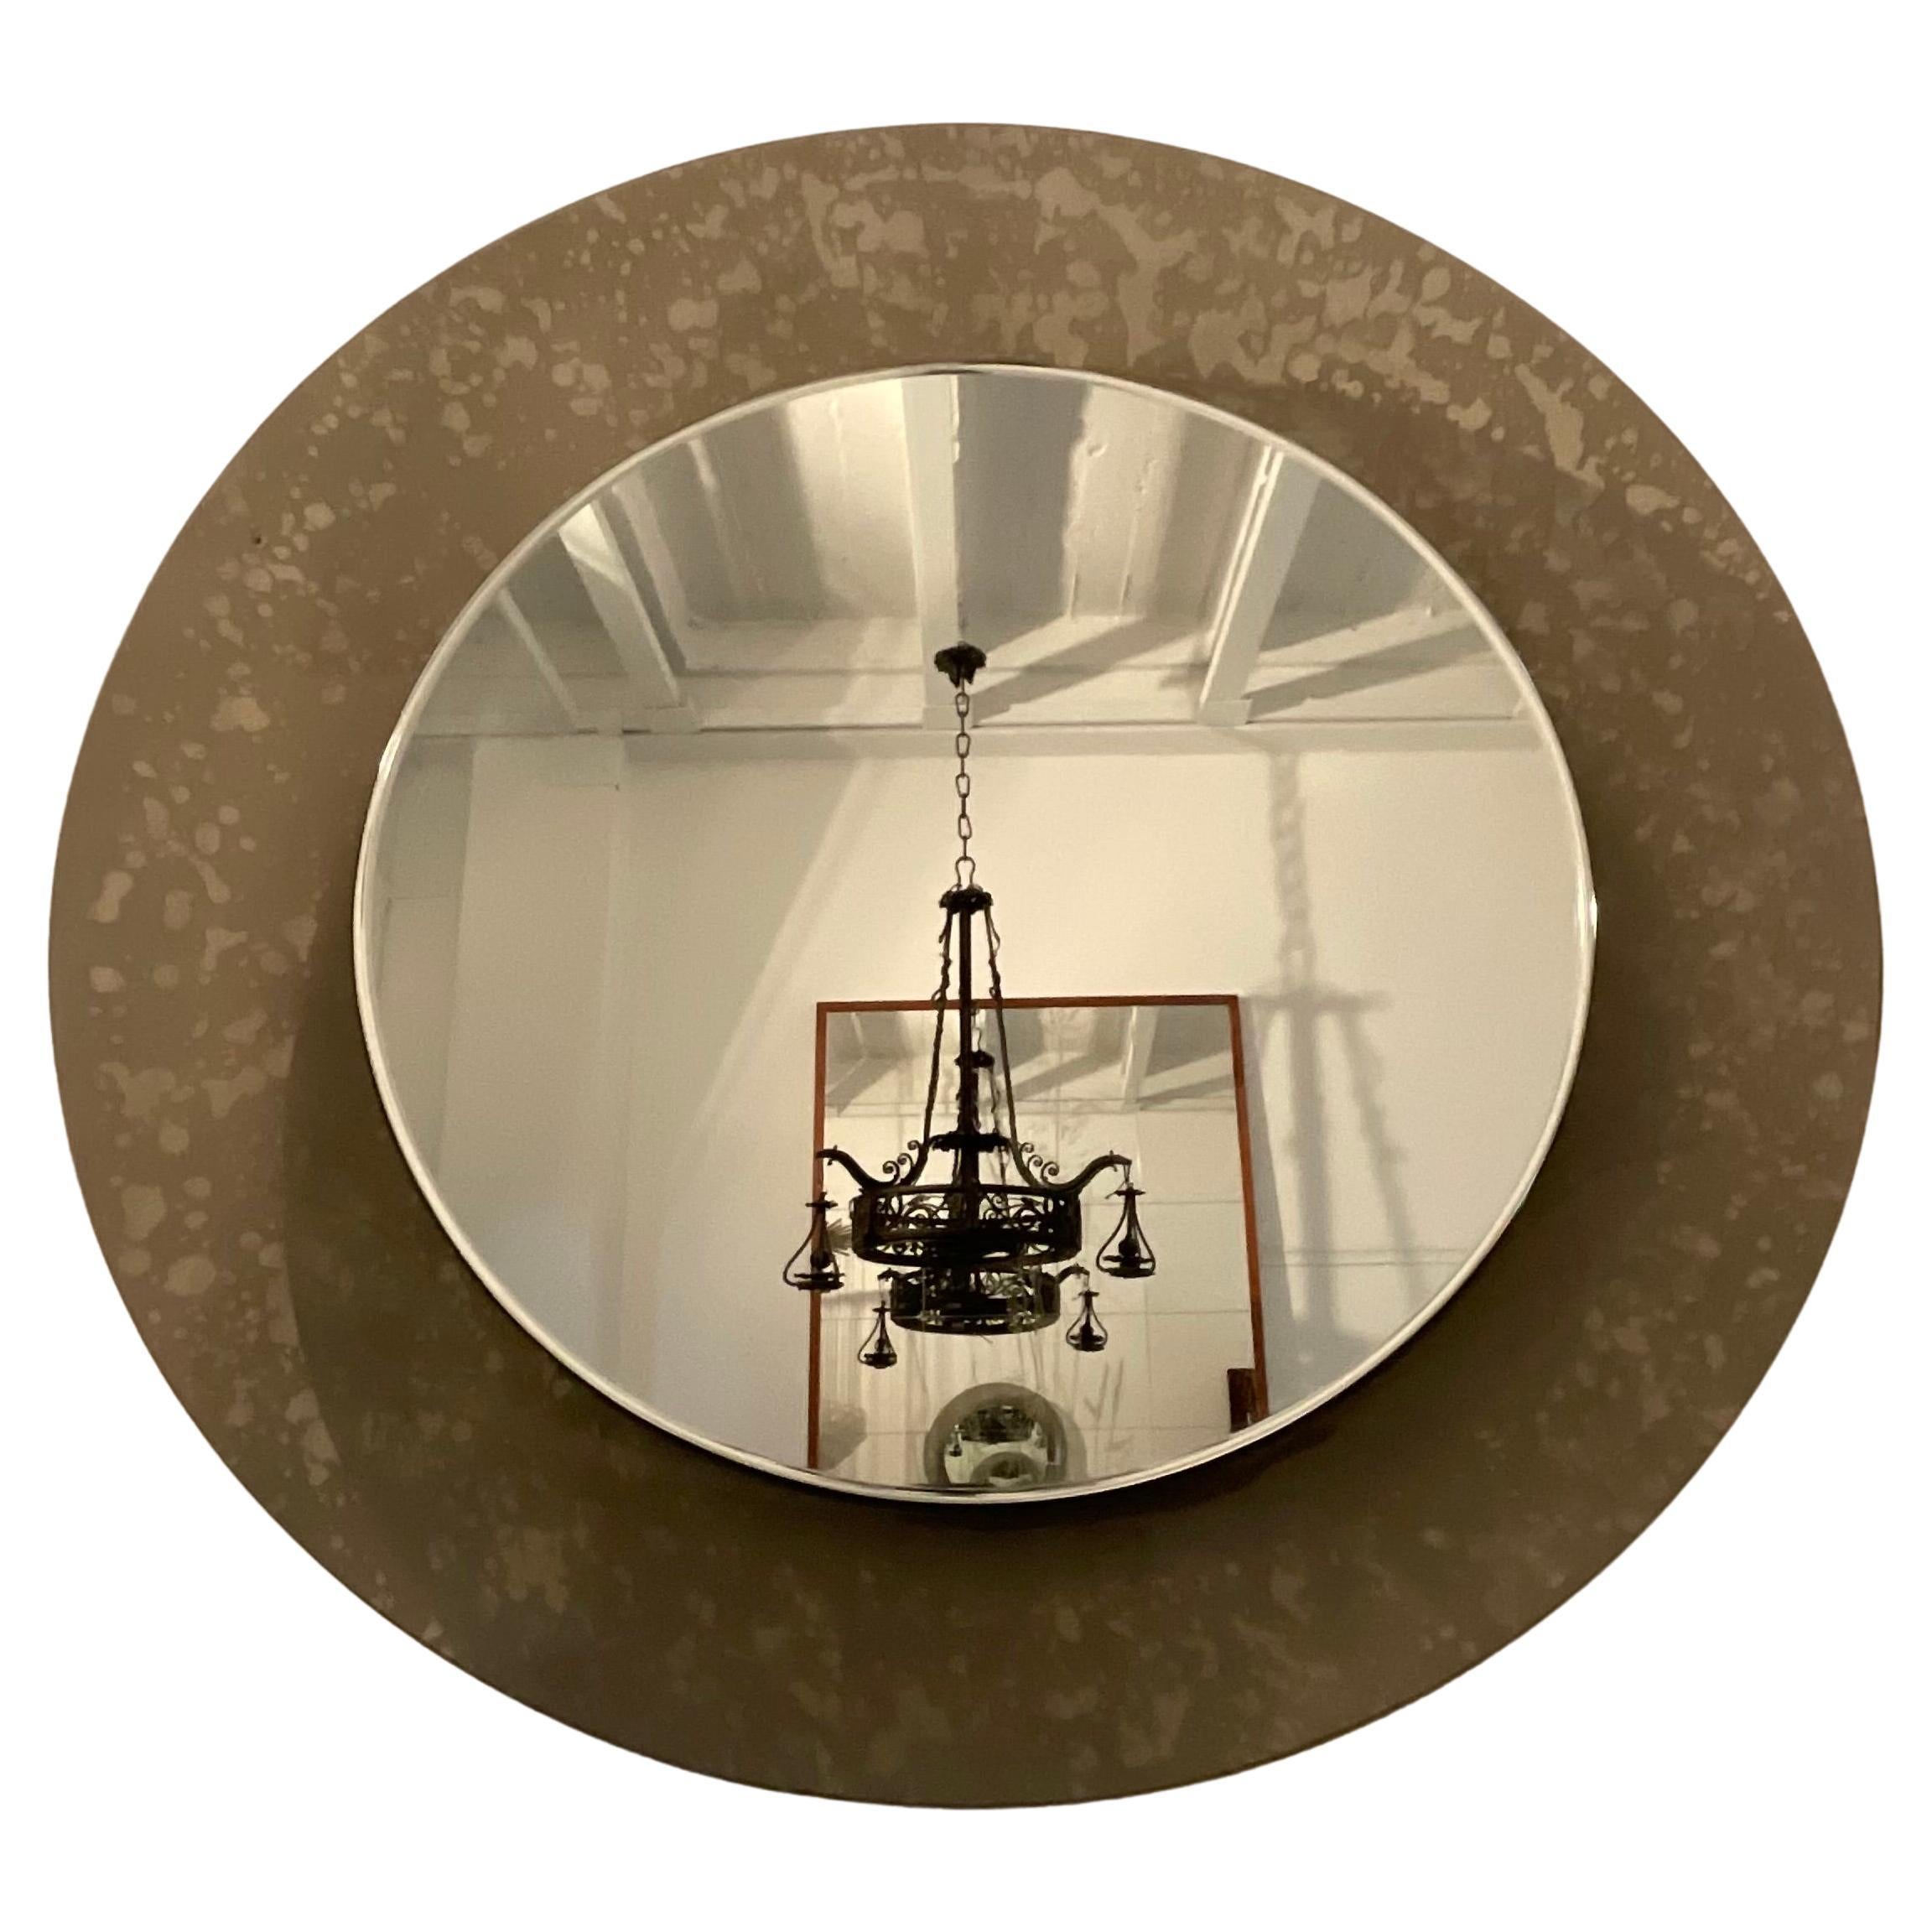 Mid-Century Modern FONTANARTE - Erwing BURGER - Hanging mirror - curved and etched glass. For Sale